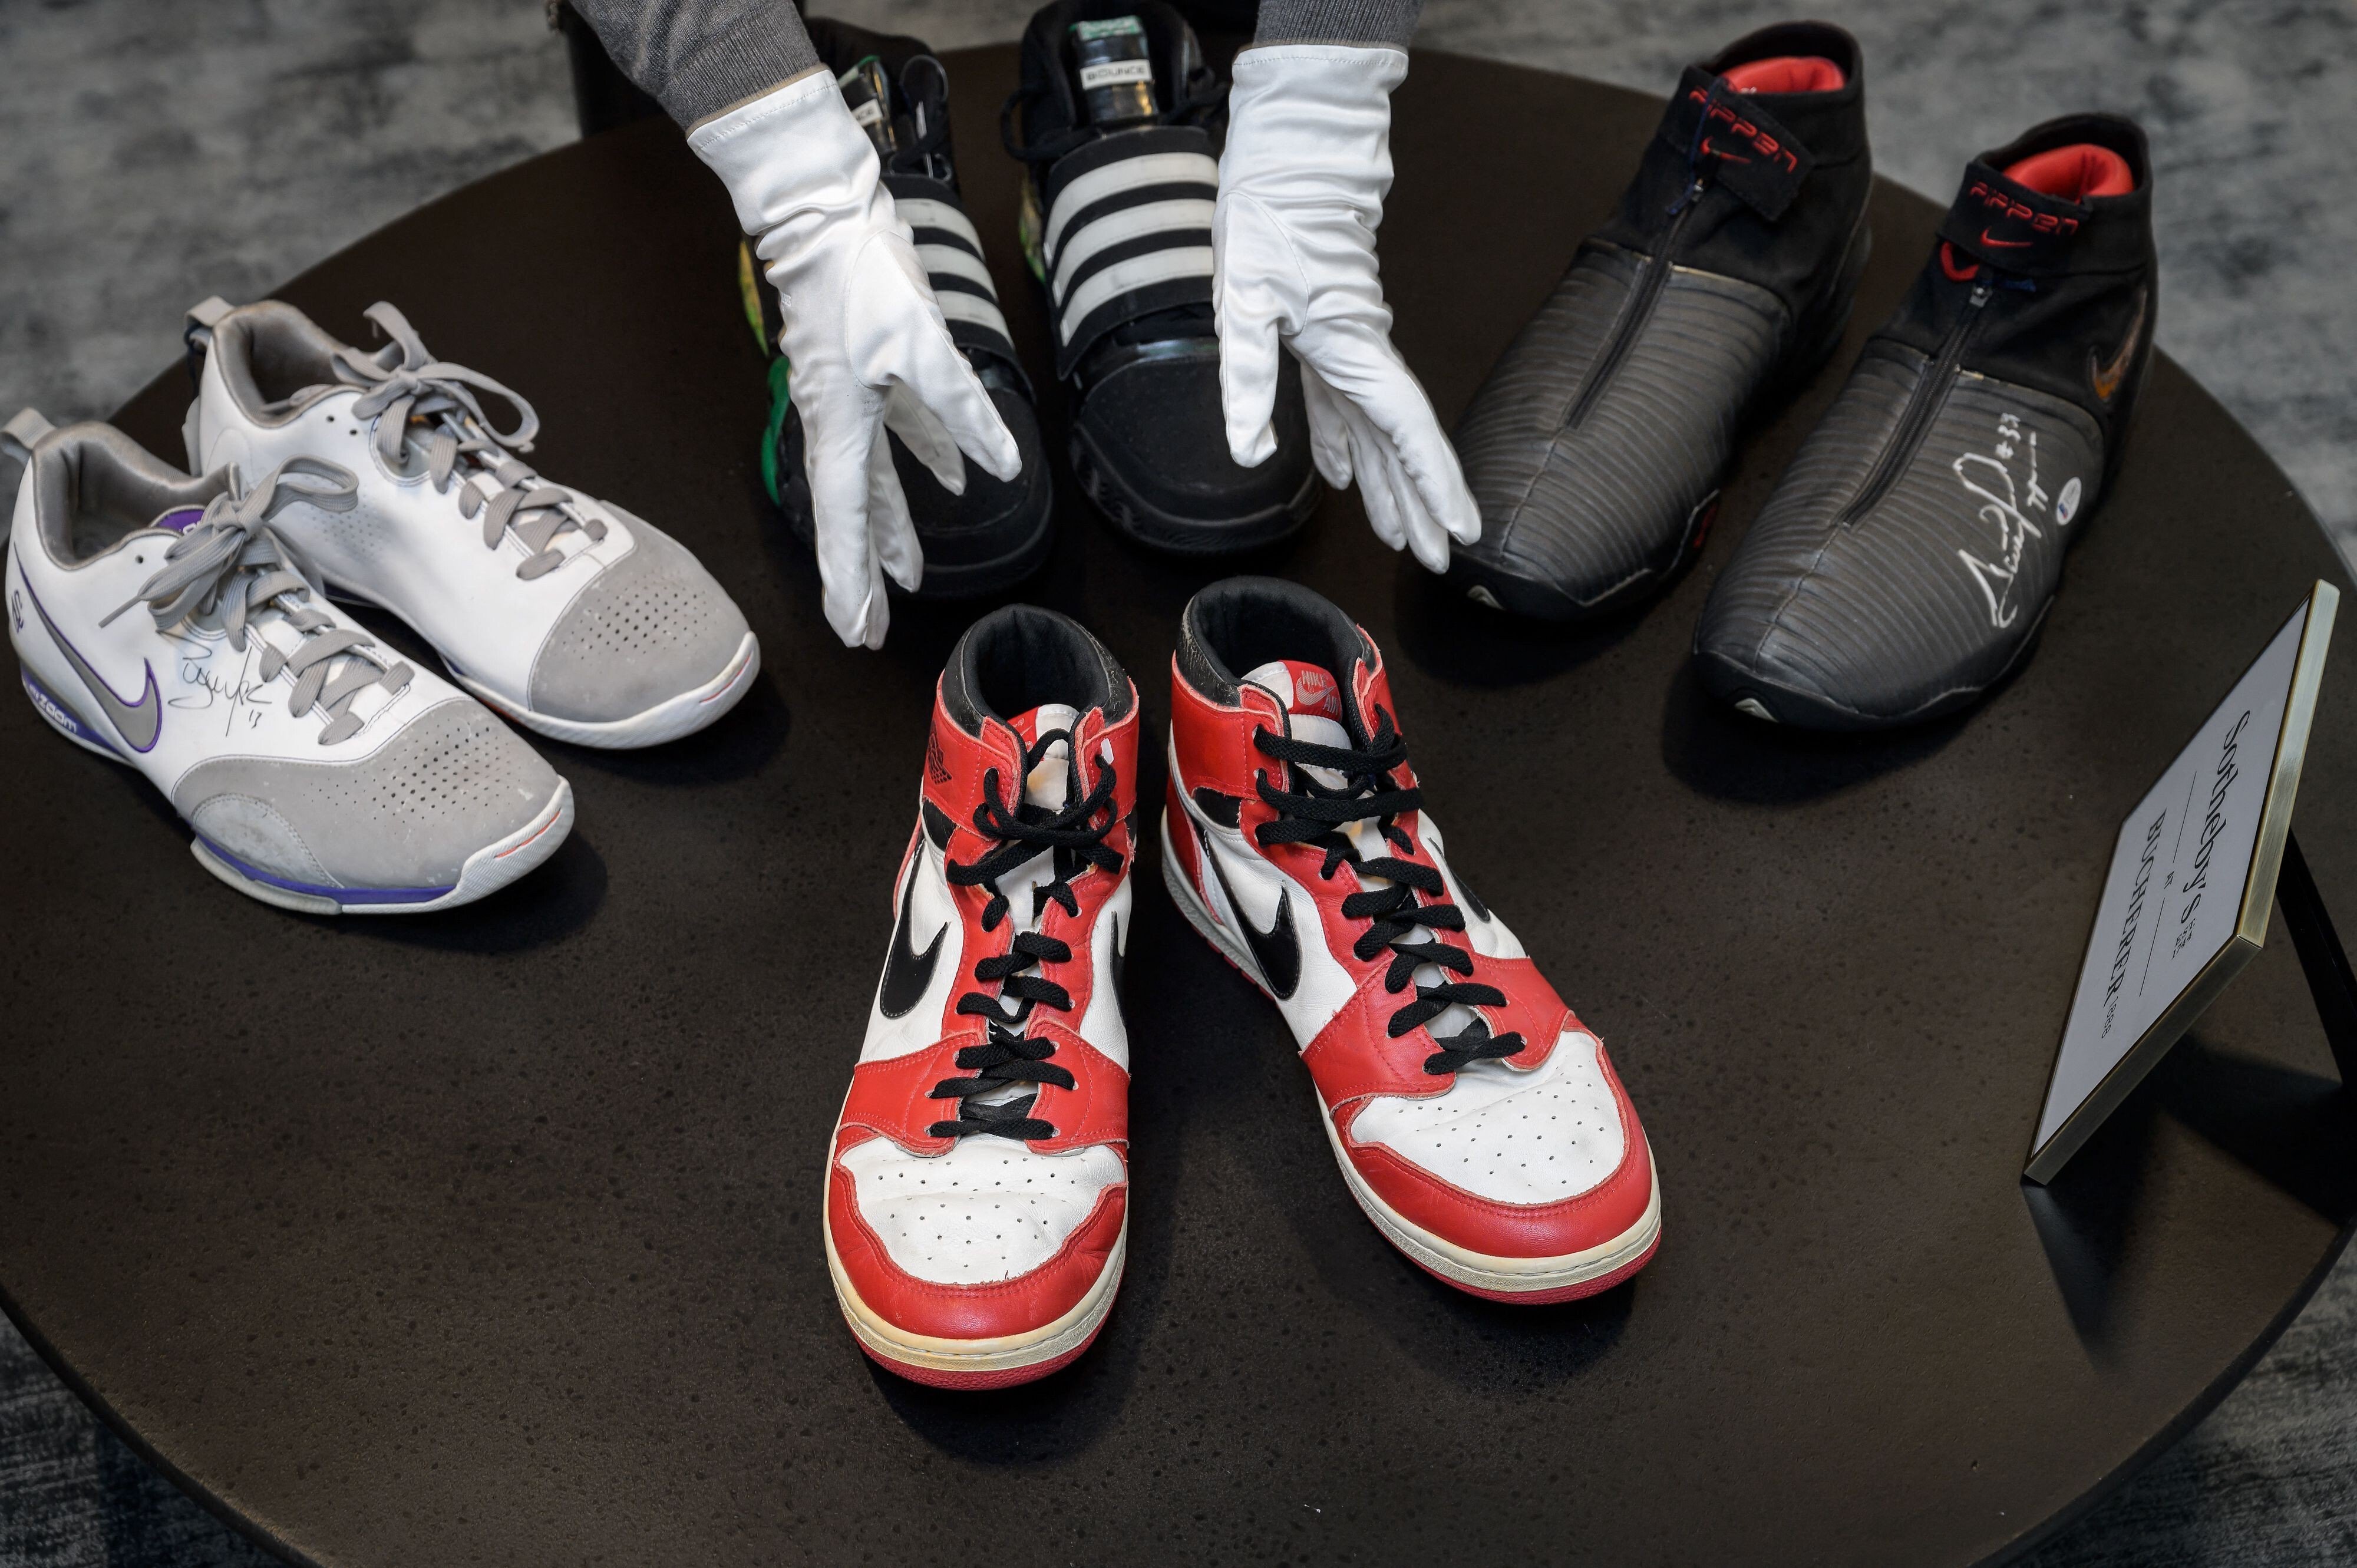 Michael Jordan Sneakers Set World Auction Record - Arts & Collections